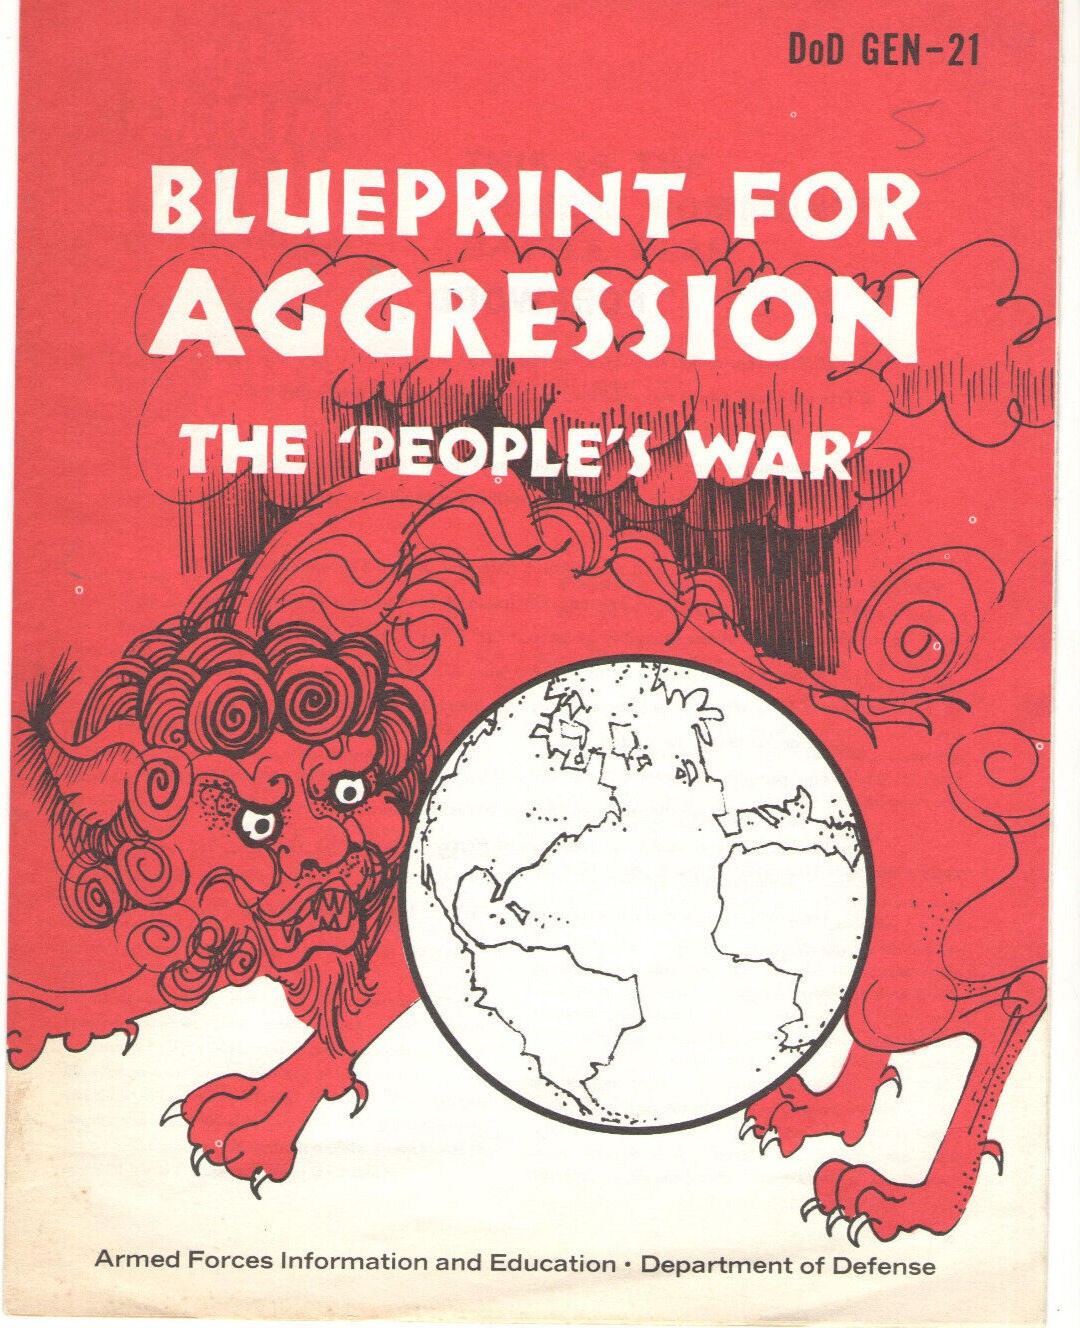 VTG 1966 DEPARTMENT OF DEFENSE BOOKLET BLUEPRINT FOR AGGRESSION-THE PEOPLE'S WAR